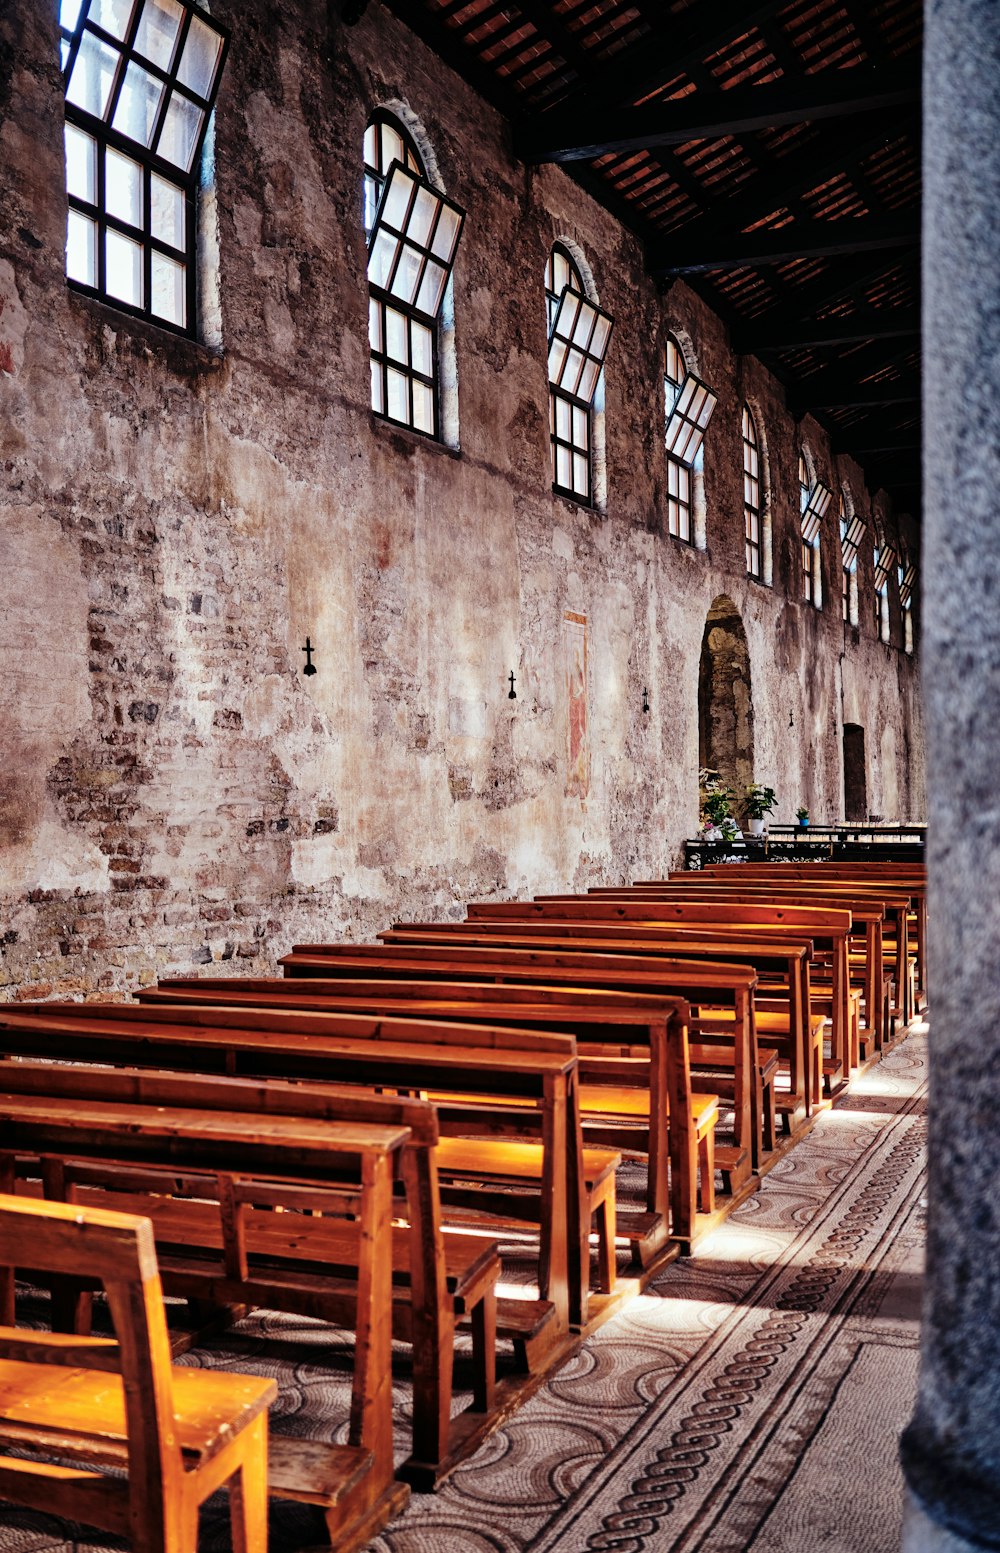 a row of wooden benches in a church